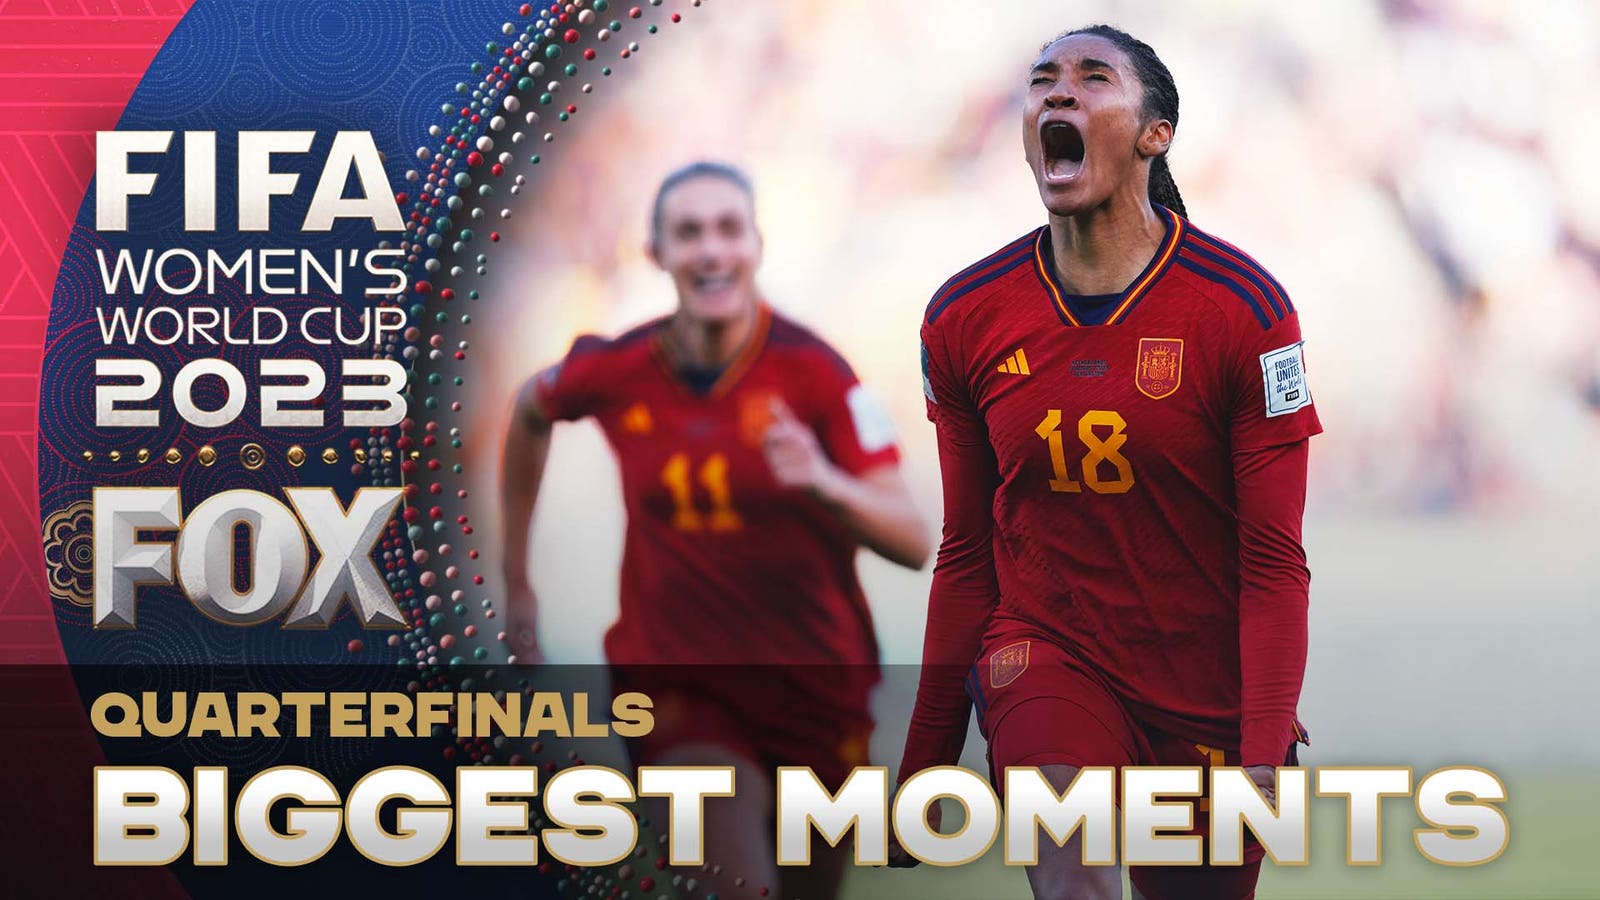 Spain's Salma Paralluelo, England's Alessia Russo lead the quarterfinals biggest moments 